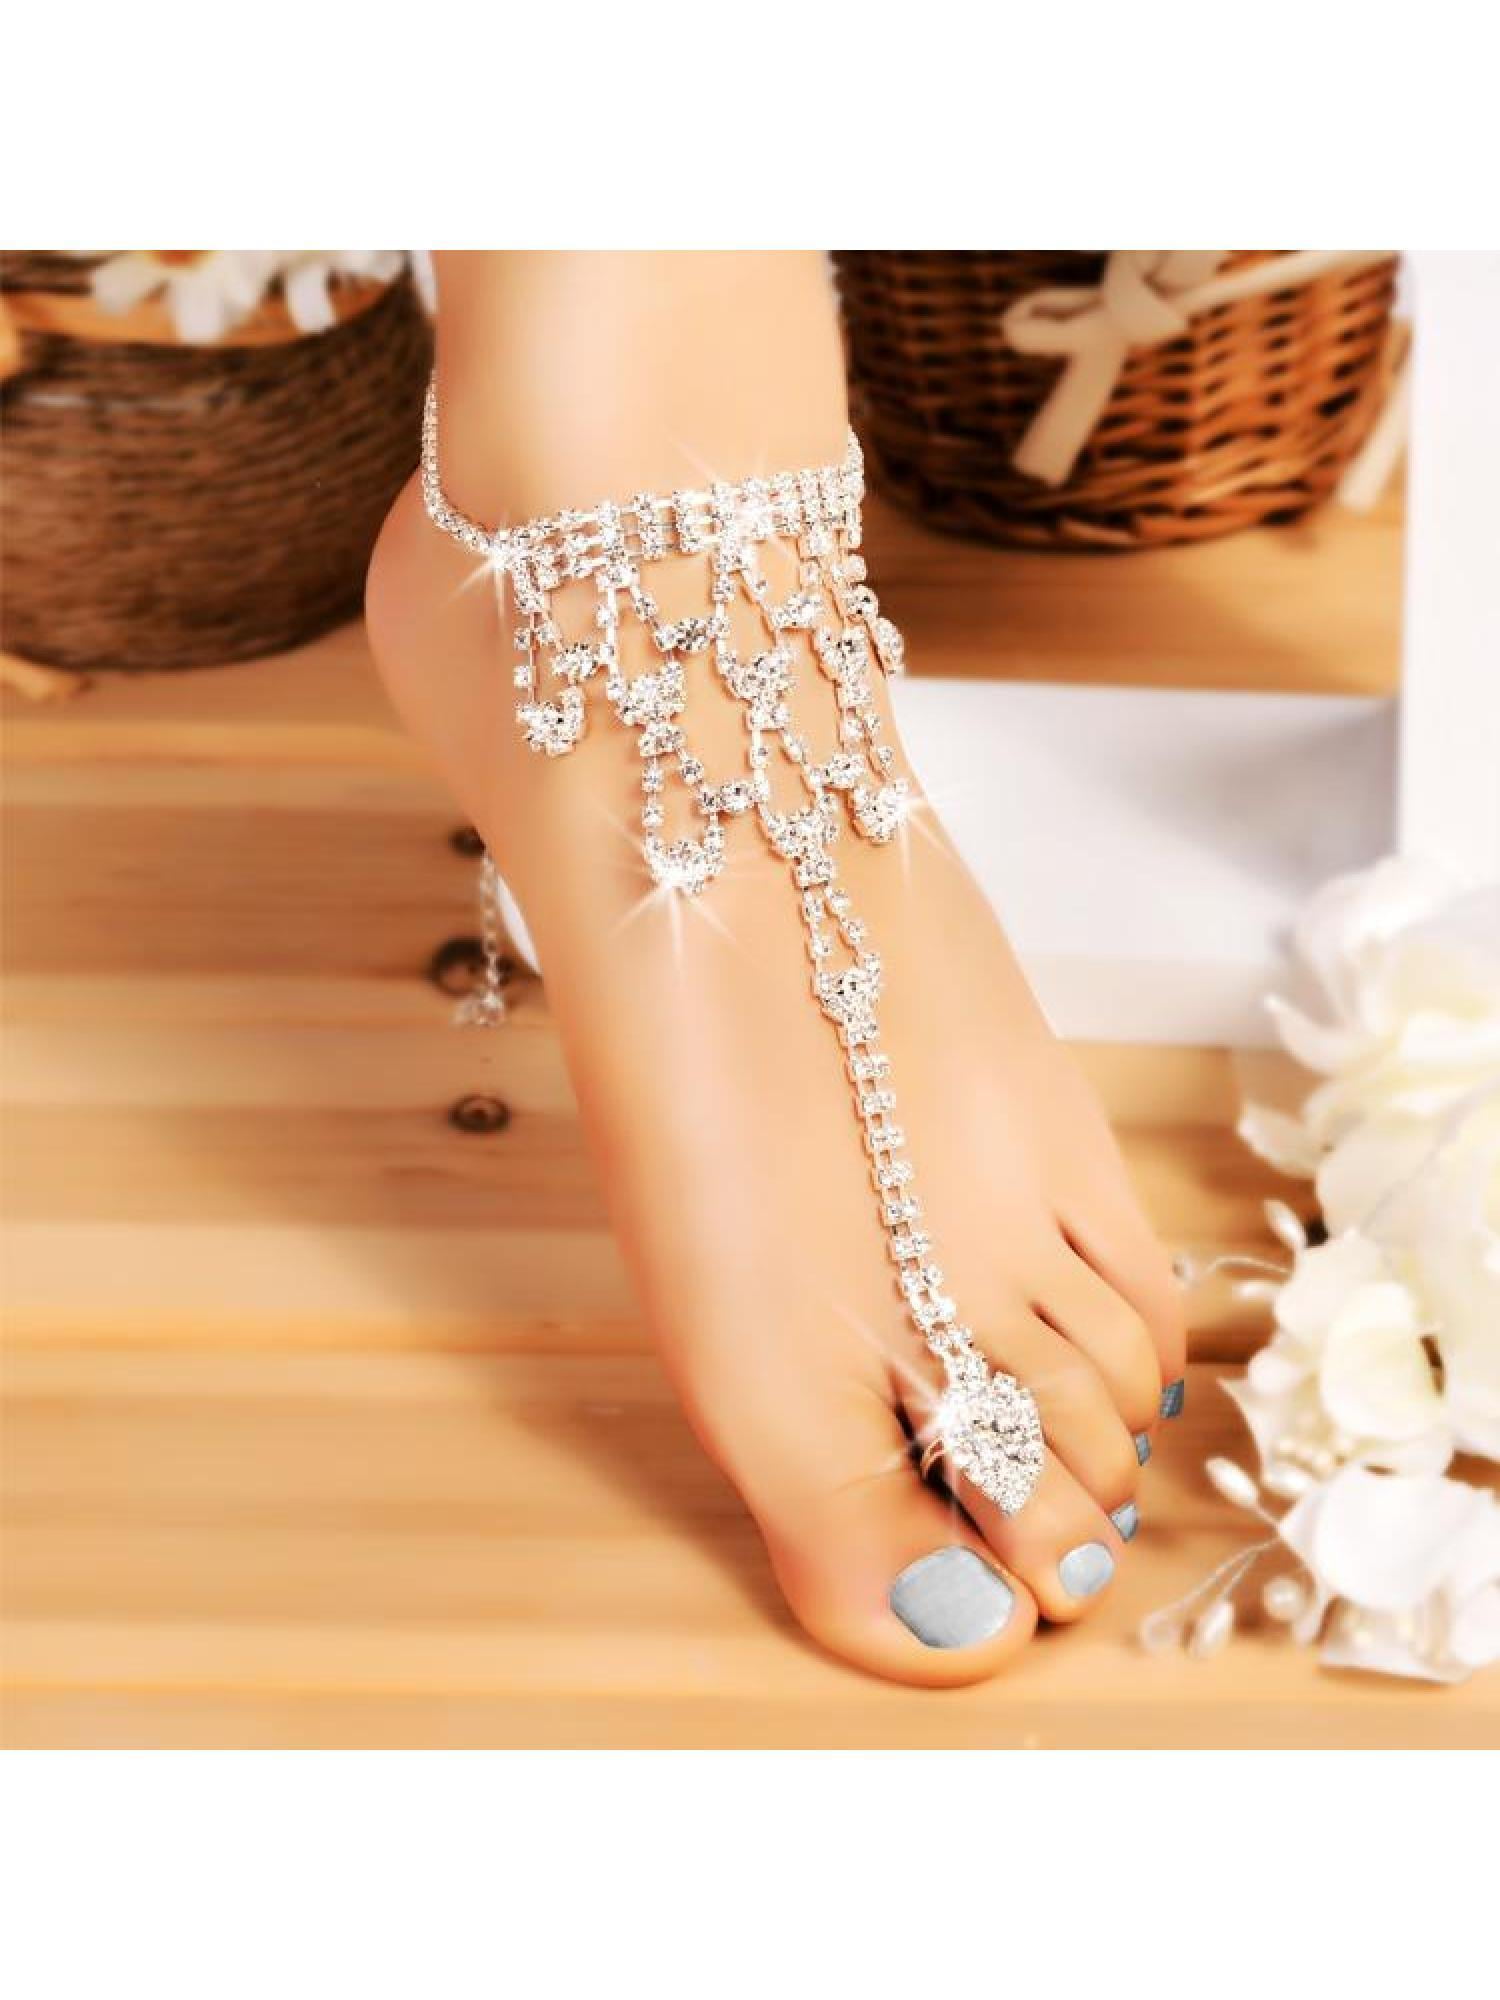 1 Piece Nicute Boho Crystal Anklet Silver Layered Ankle Bracelets Wedding Barefoot Sandal Beach Foot Chain for Women and Girls 